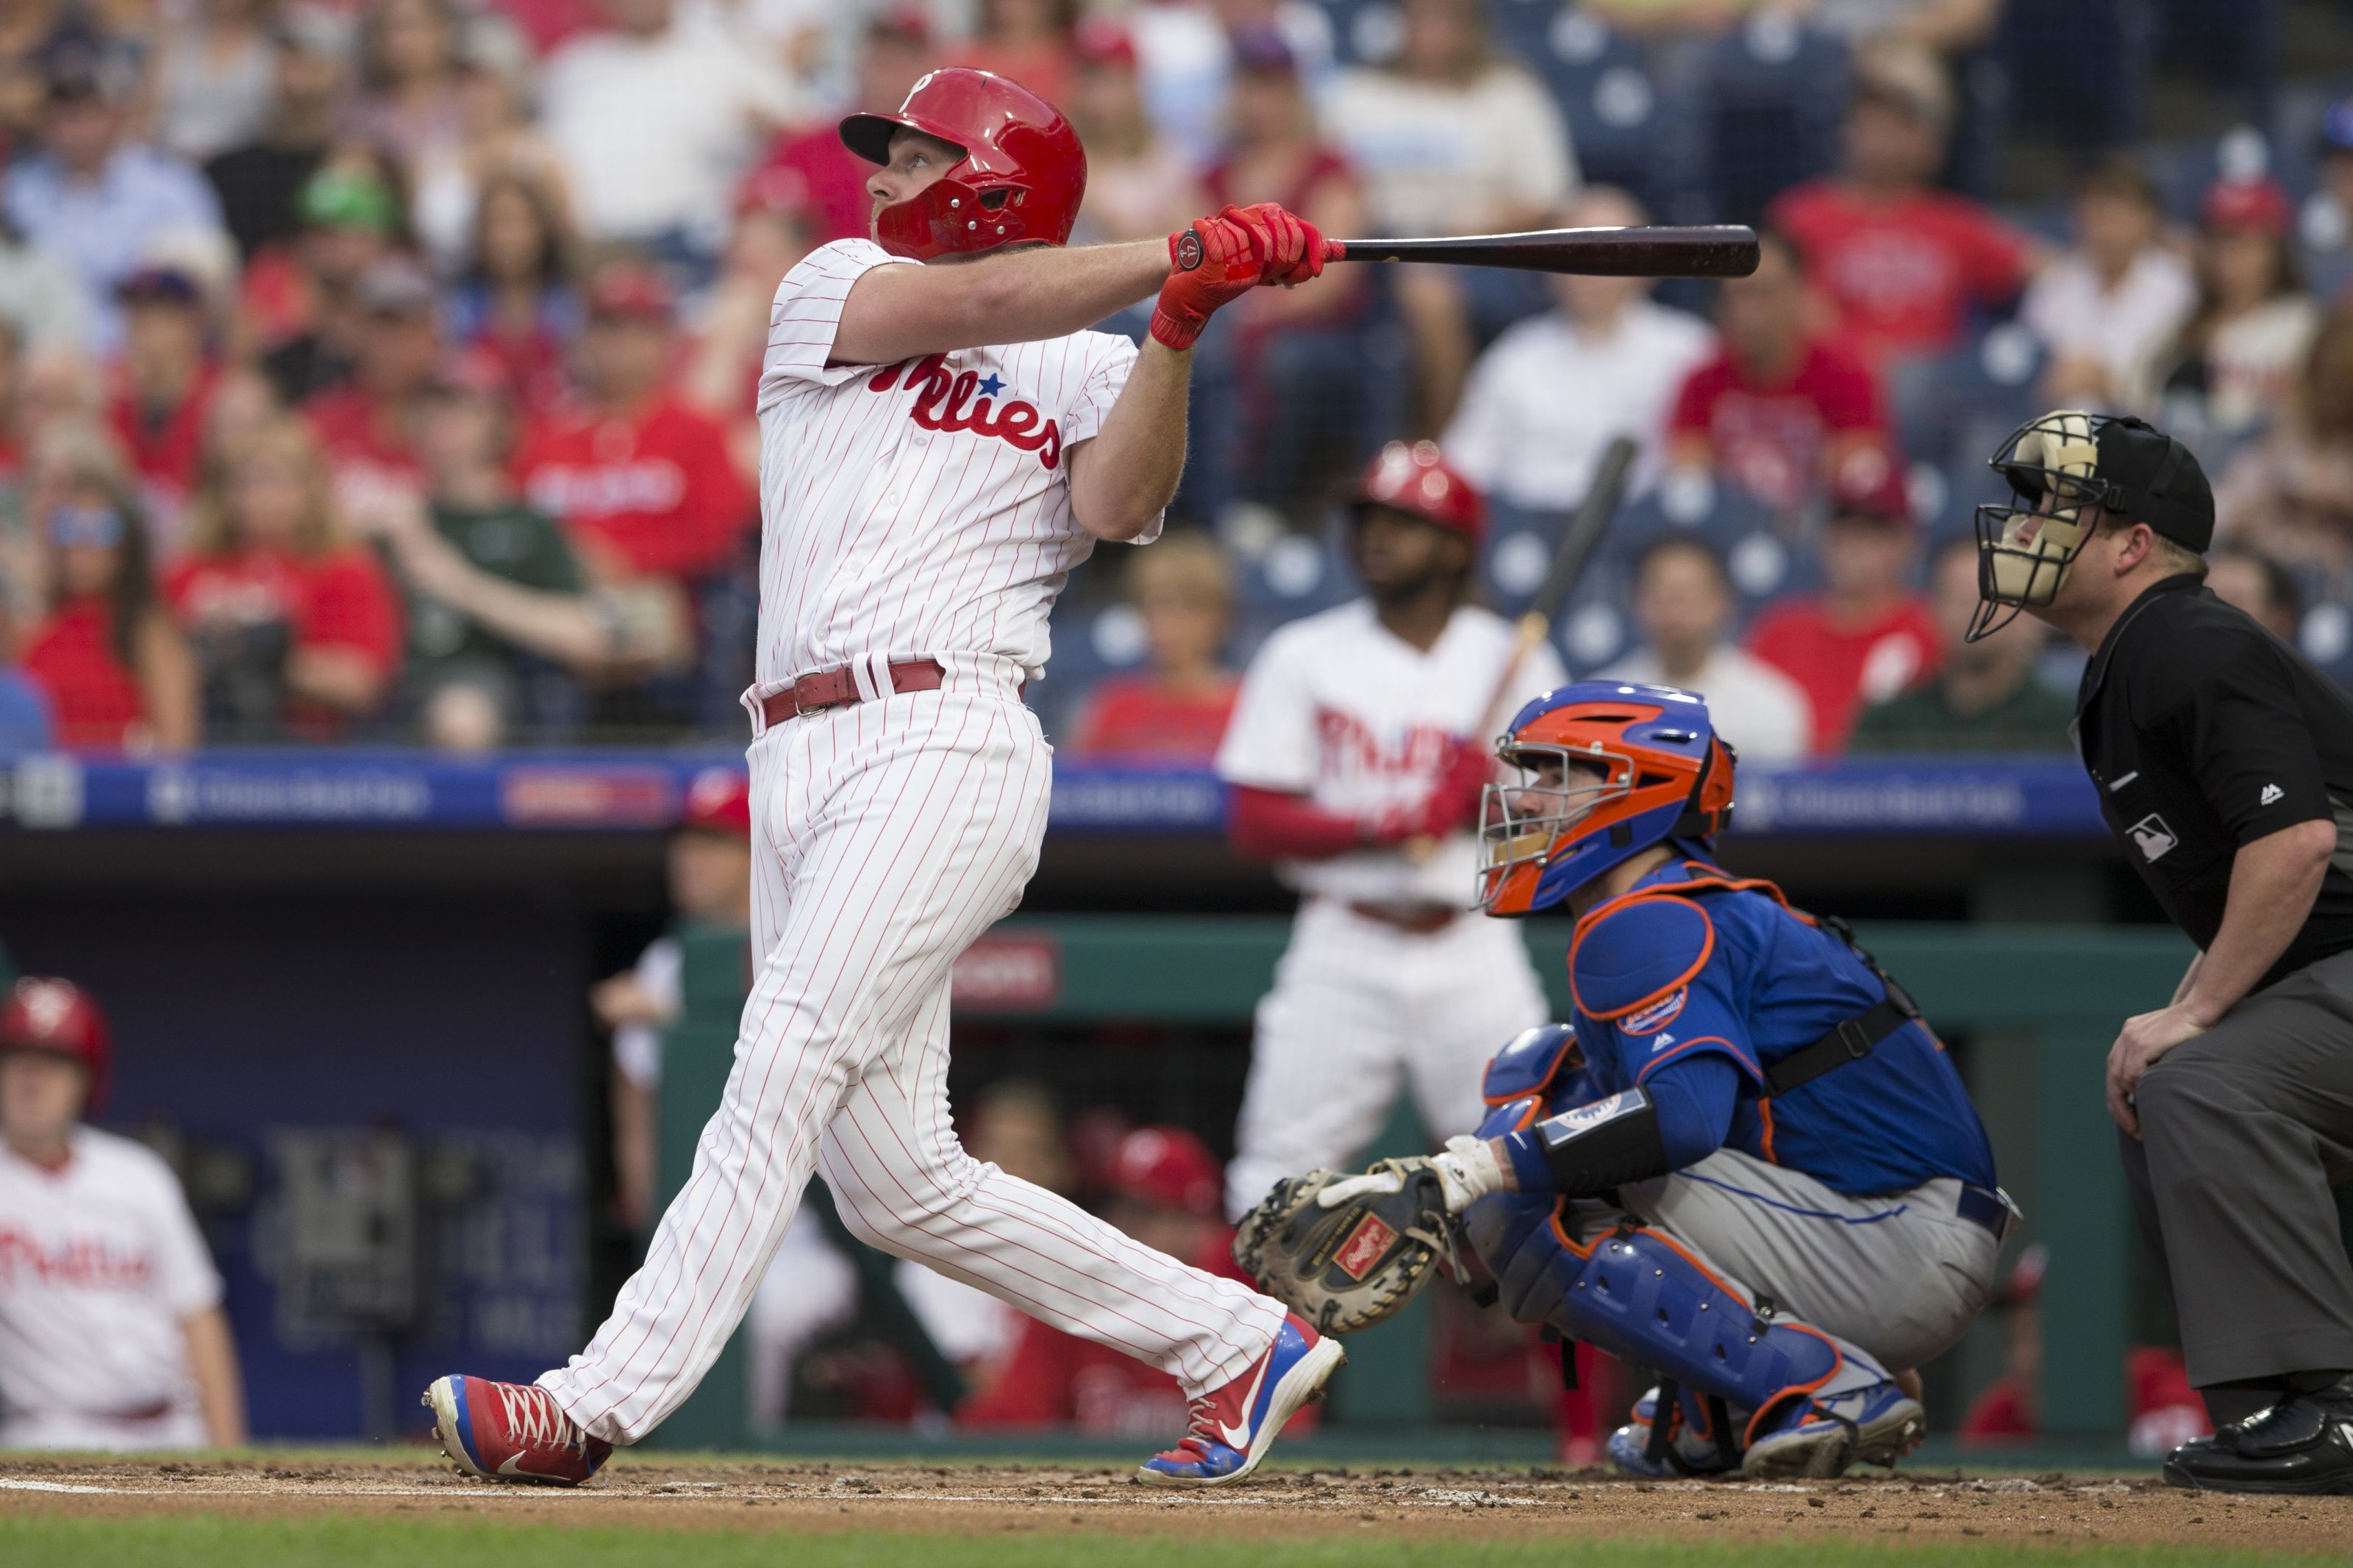 Saturday Review Will Phillies Prevent White Sox From Splurging?